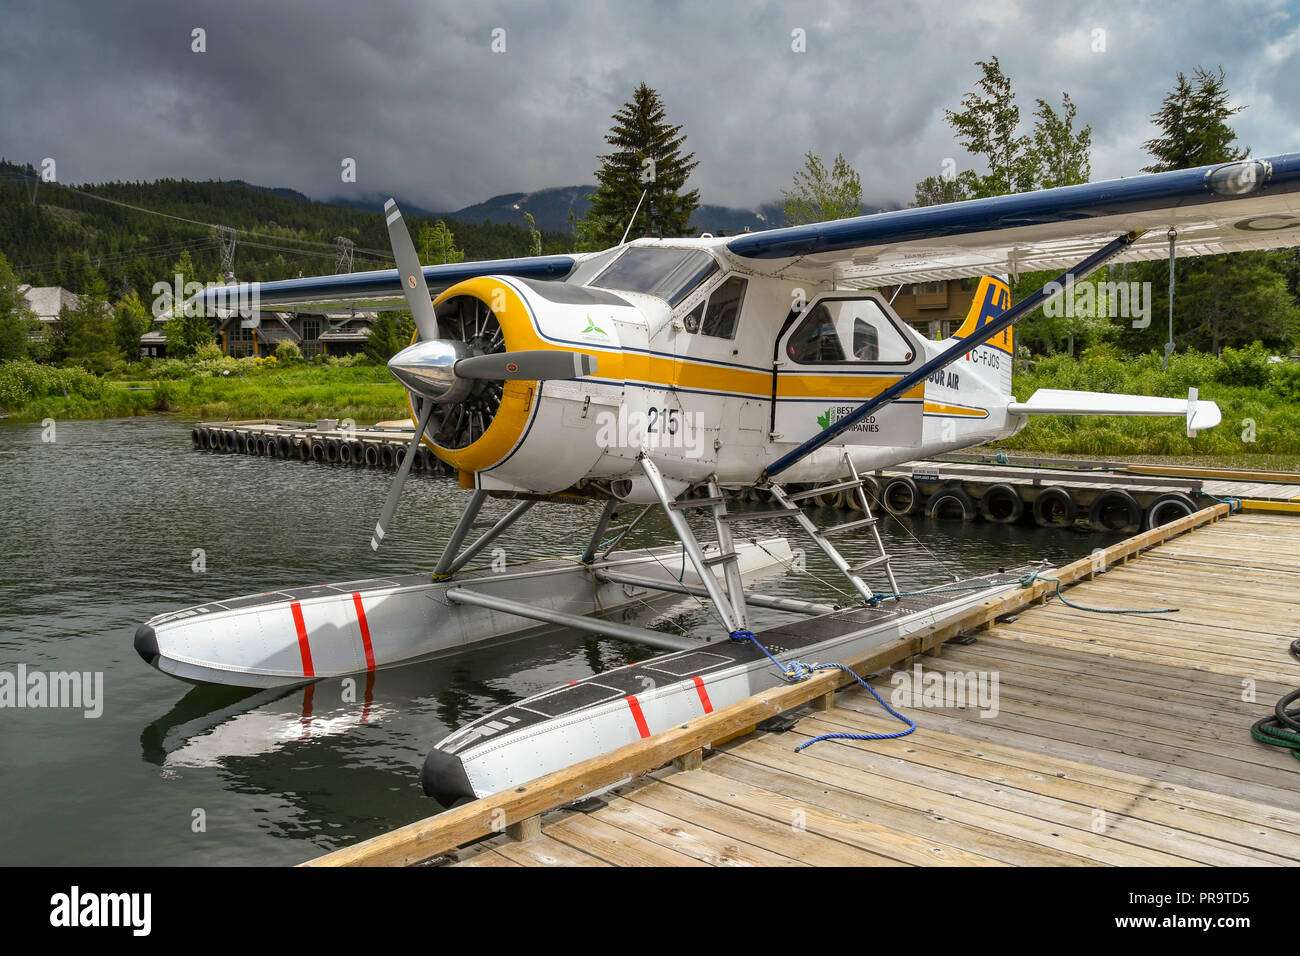 WHISTLER, BC, CANADA - JUNE 2018: De Havilland Beaver seaplane operated by Harbour Air tied up at the seaplane terminal in Whistler. Stock Photo